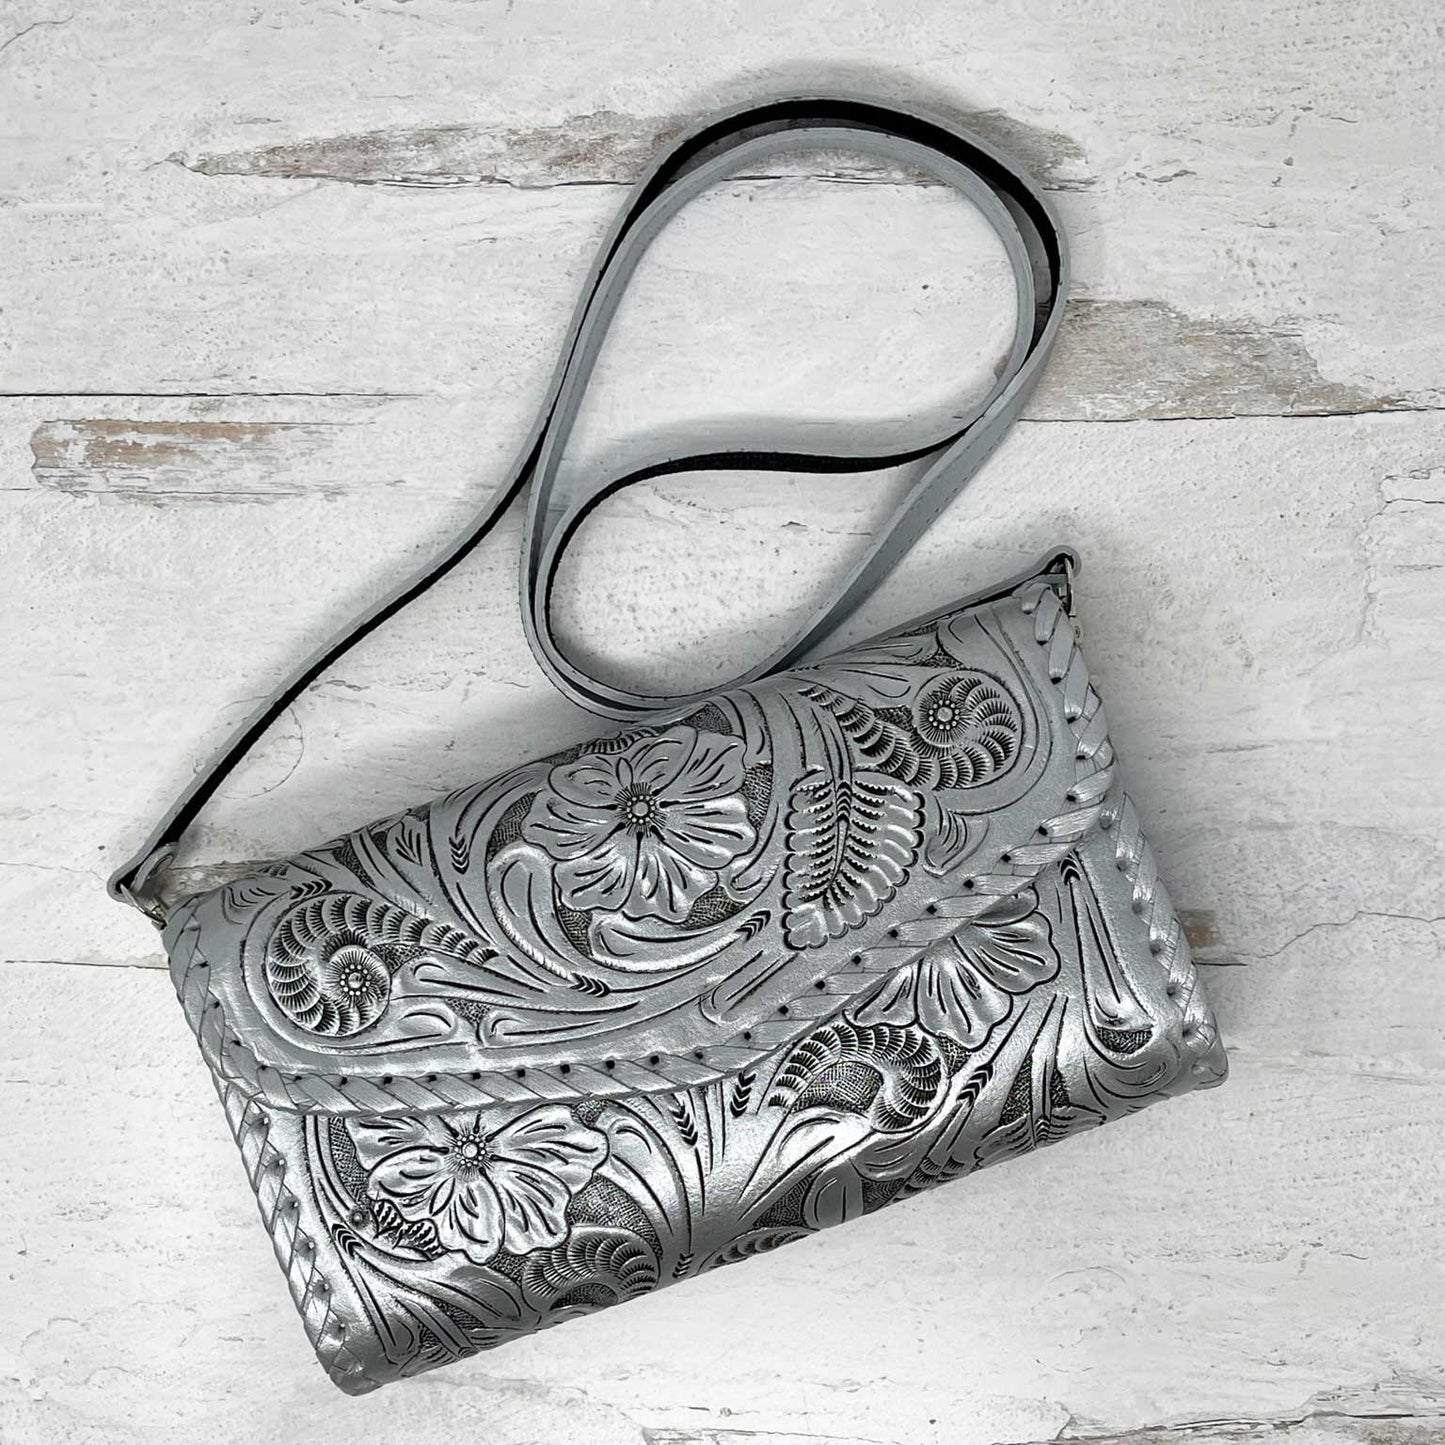 Itzel Silver Leather Crossbody Bag by Que Chula